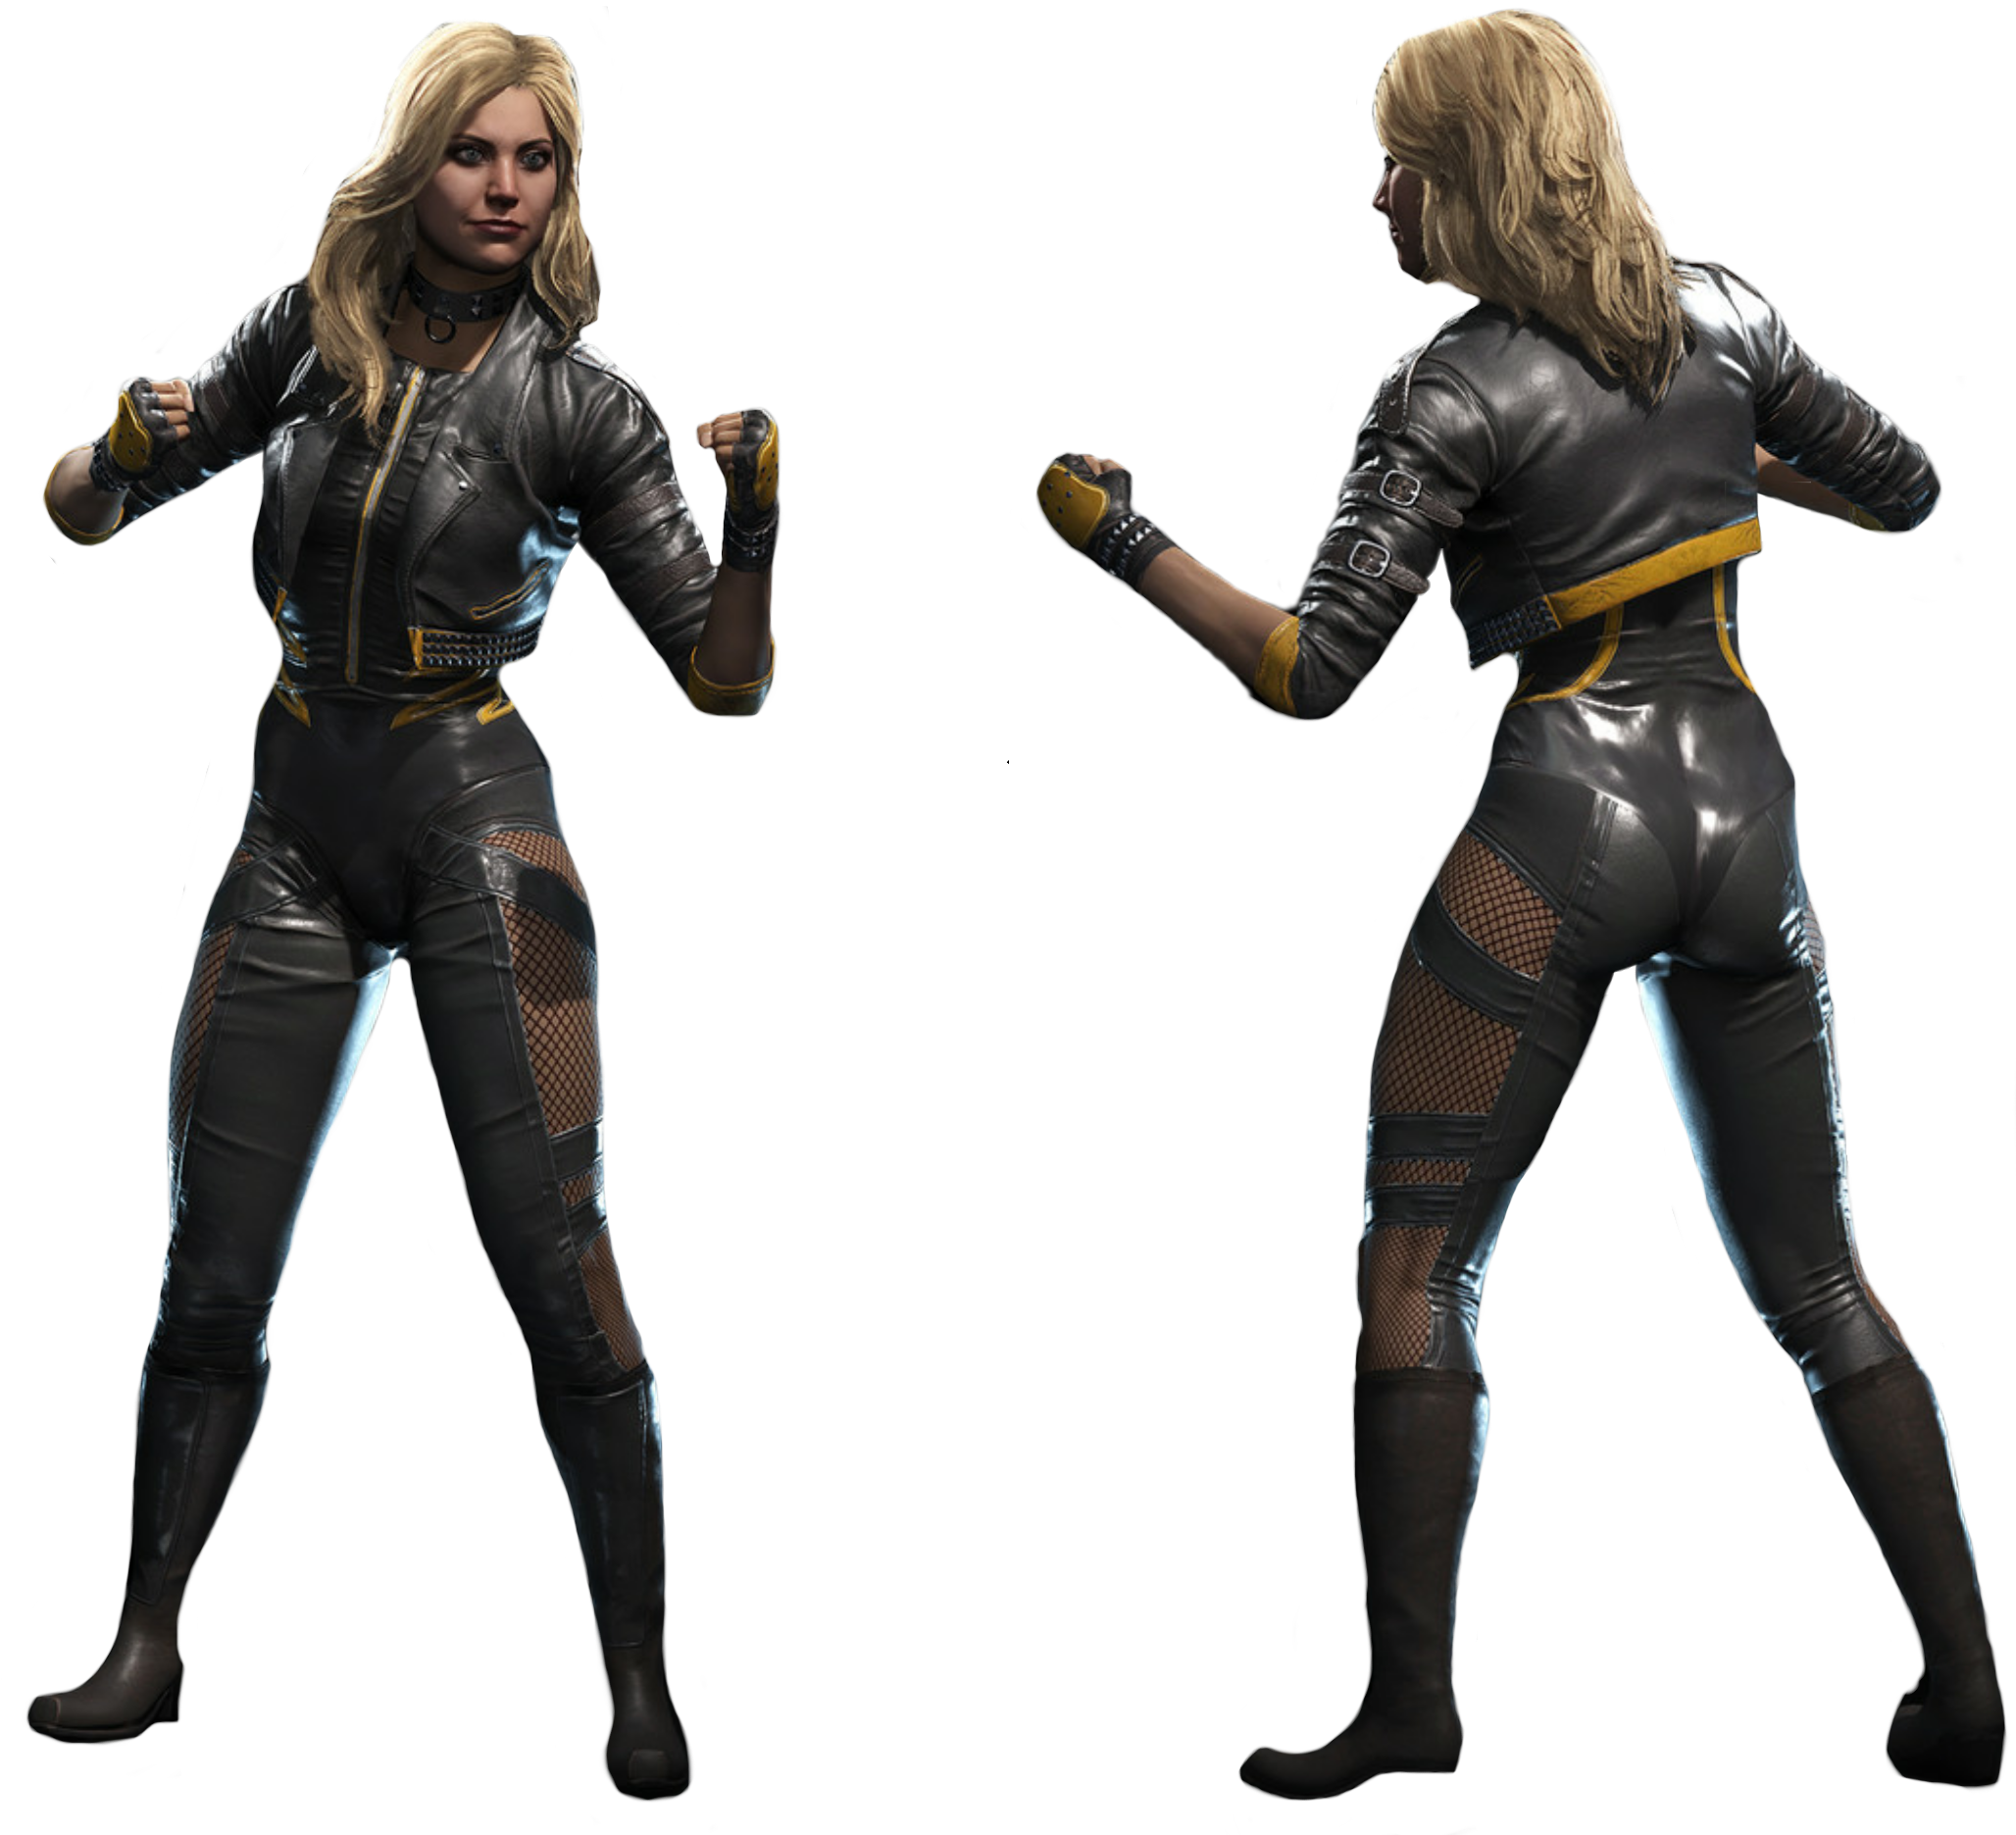 It Is A Pretty Nice Costume - Black Canary Injustice 2 (2199x2000)